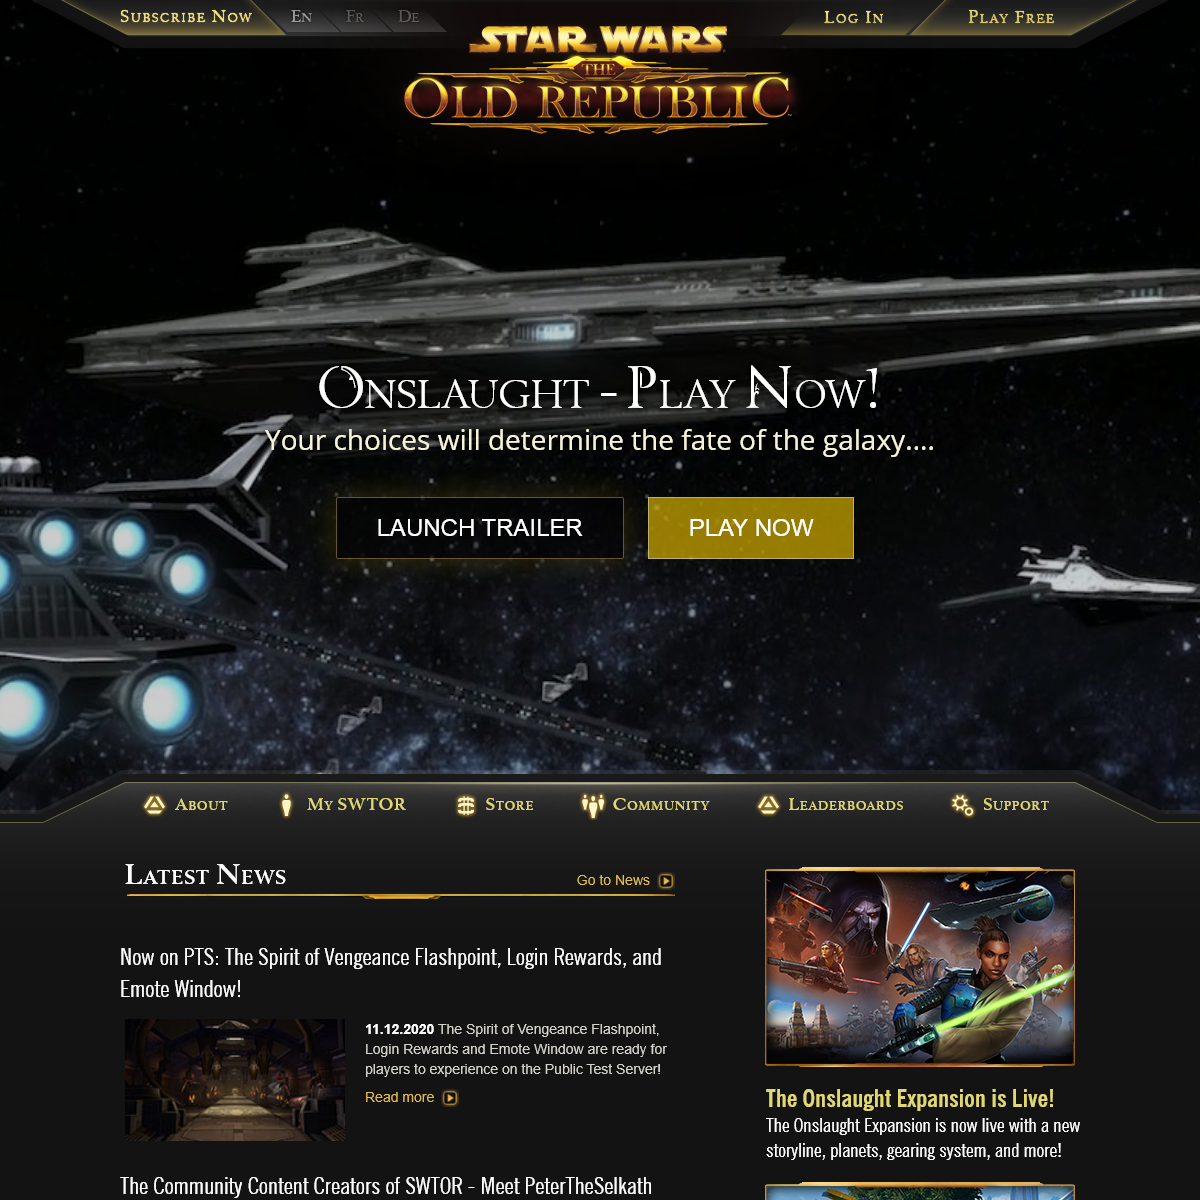 A complete backup of swtor.com